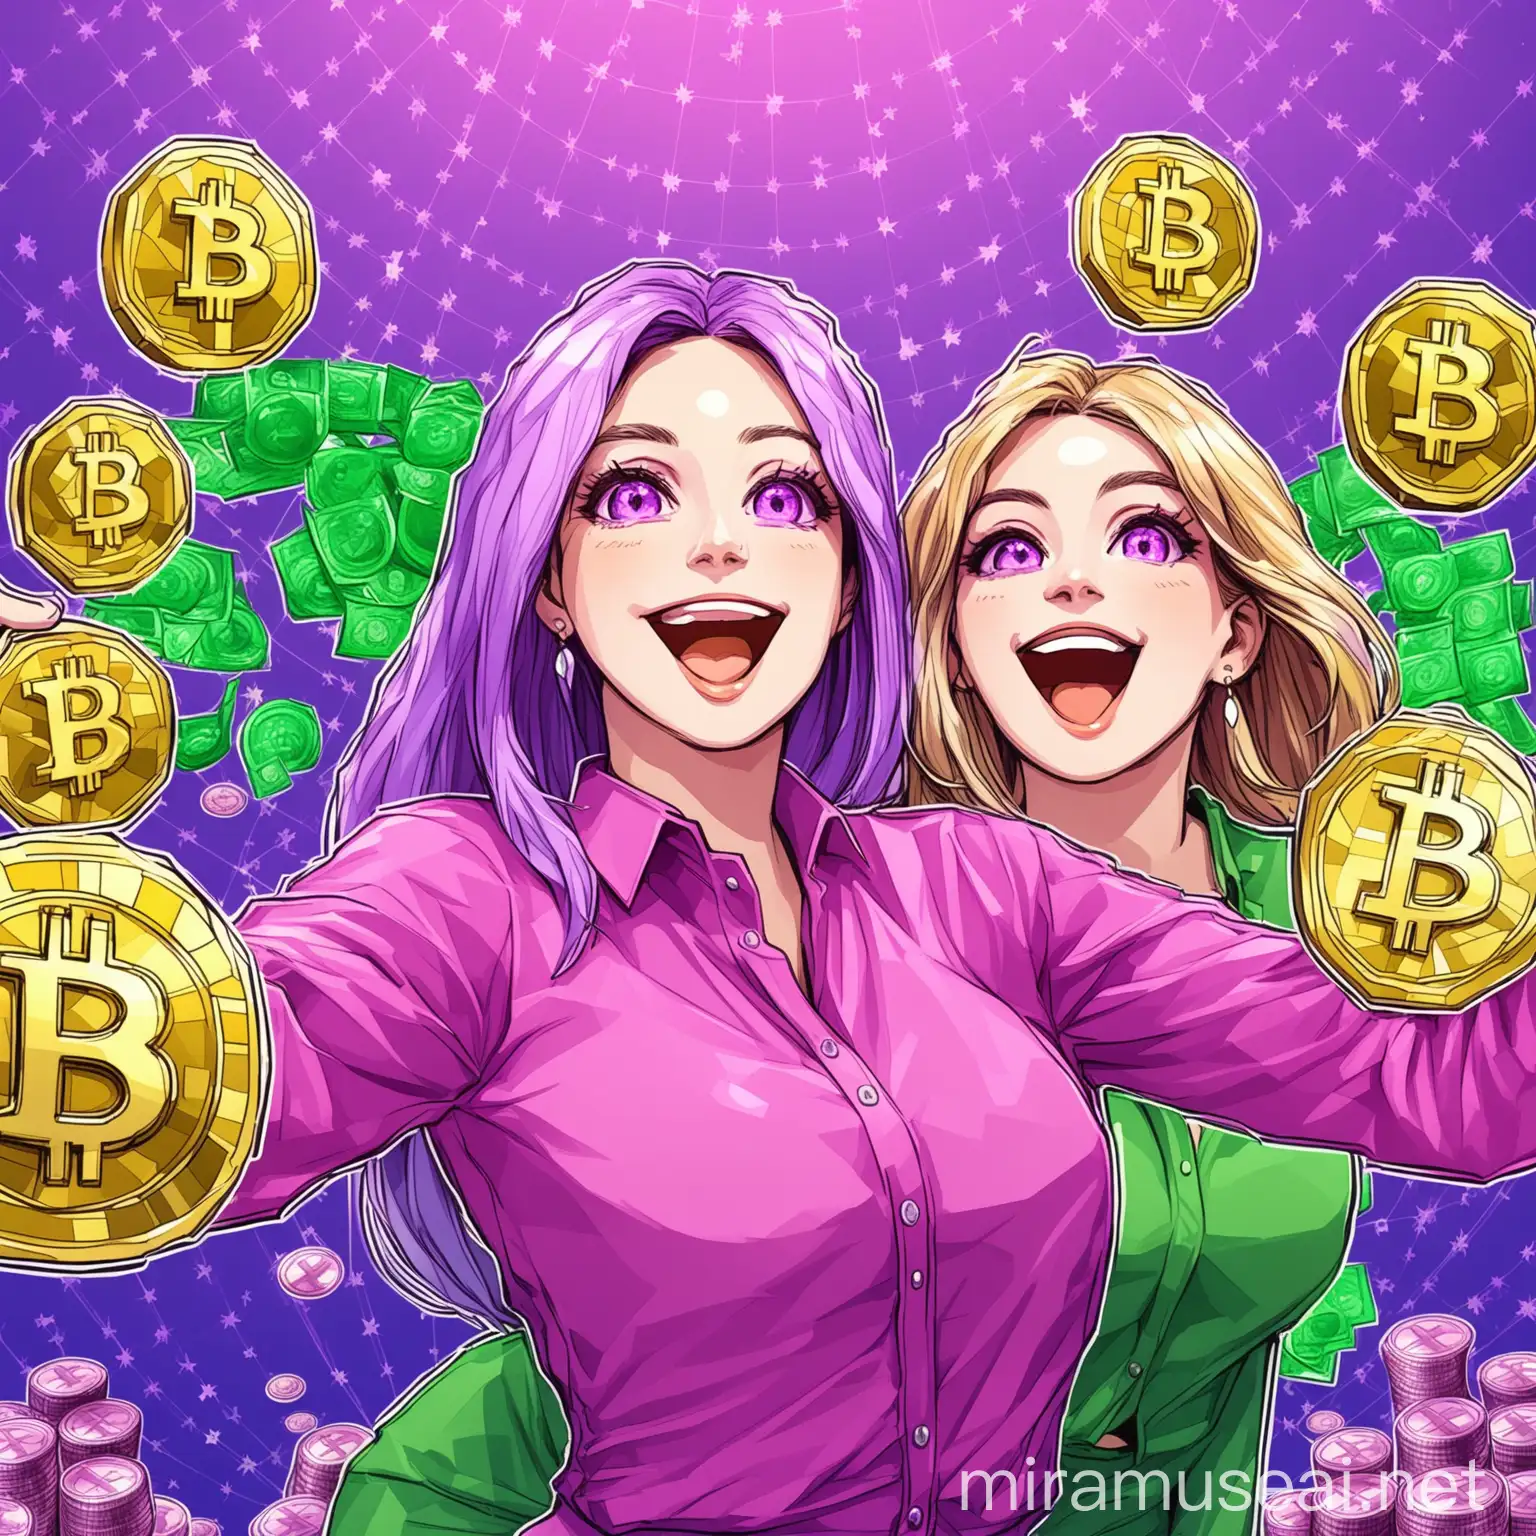 make a picture of big earnings in cryptocurrency, use the colors pink green purple and happy women
